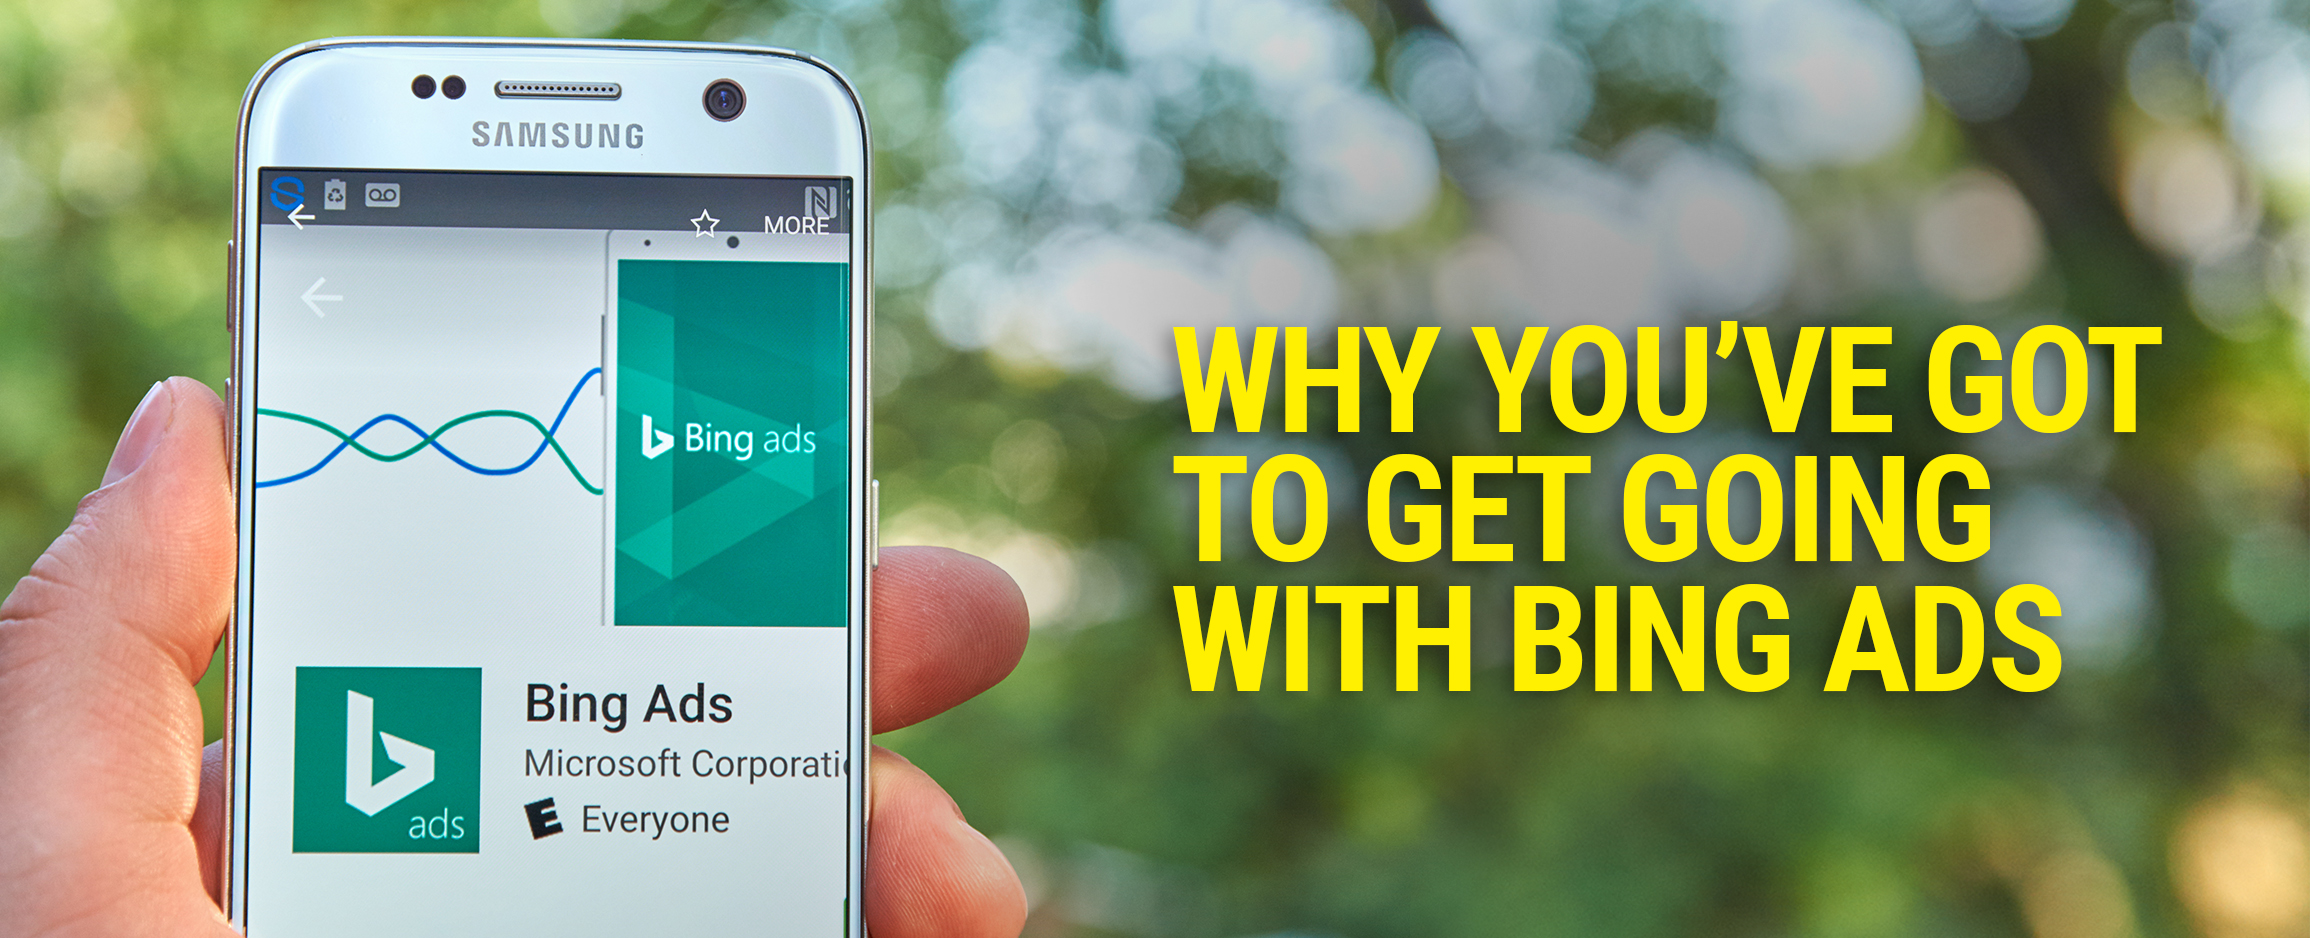 Why You’ve Got To Get Going With Bing Ads